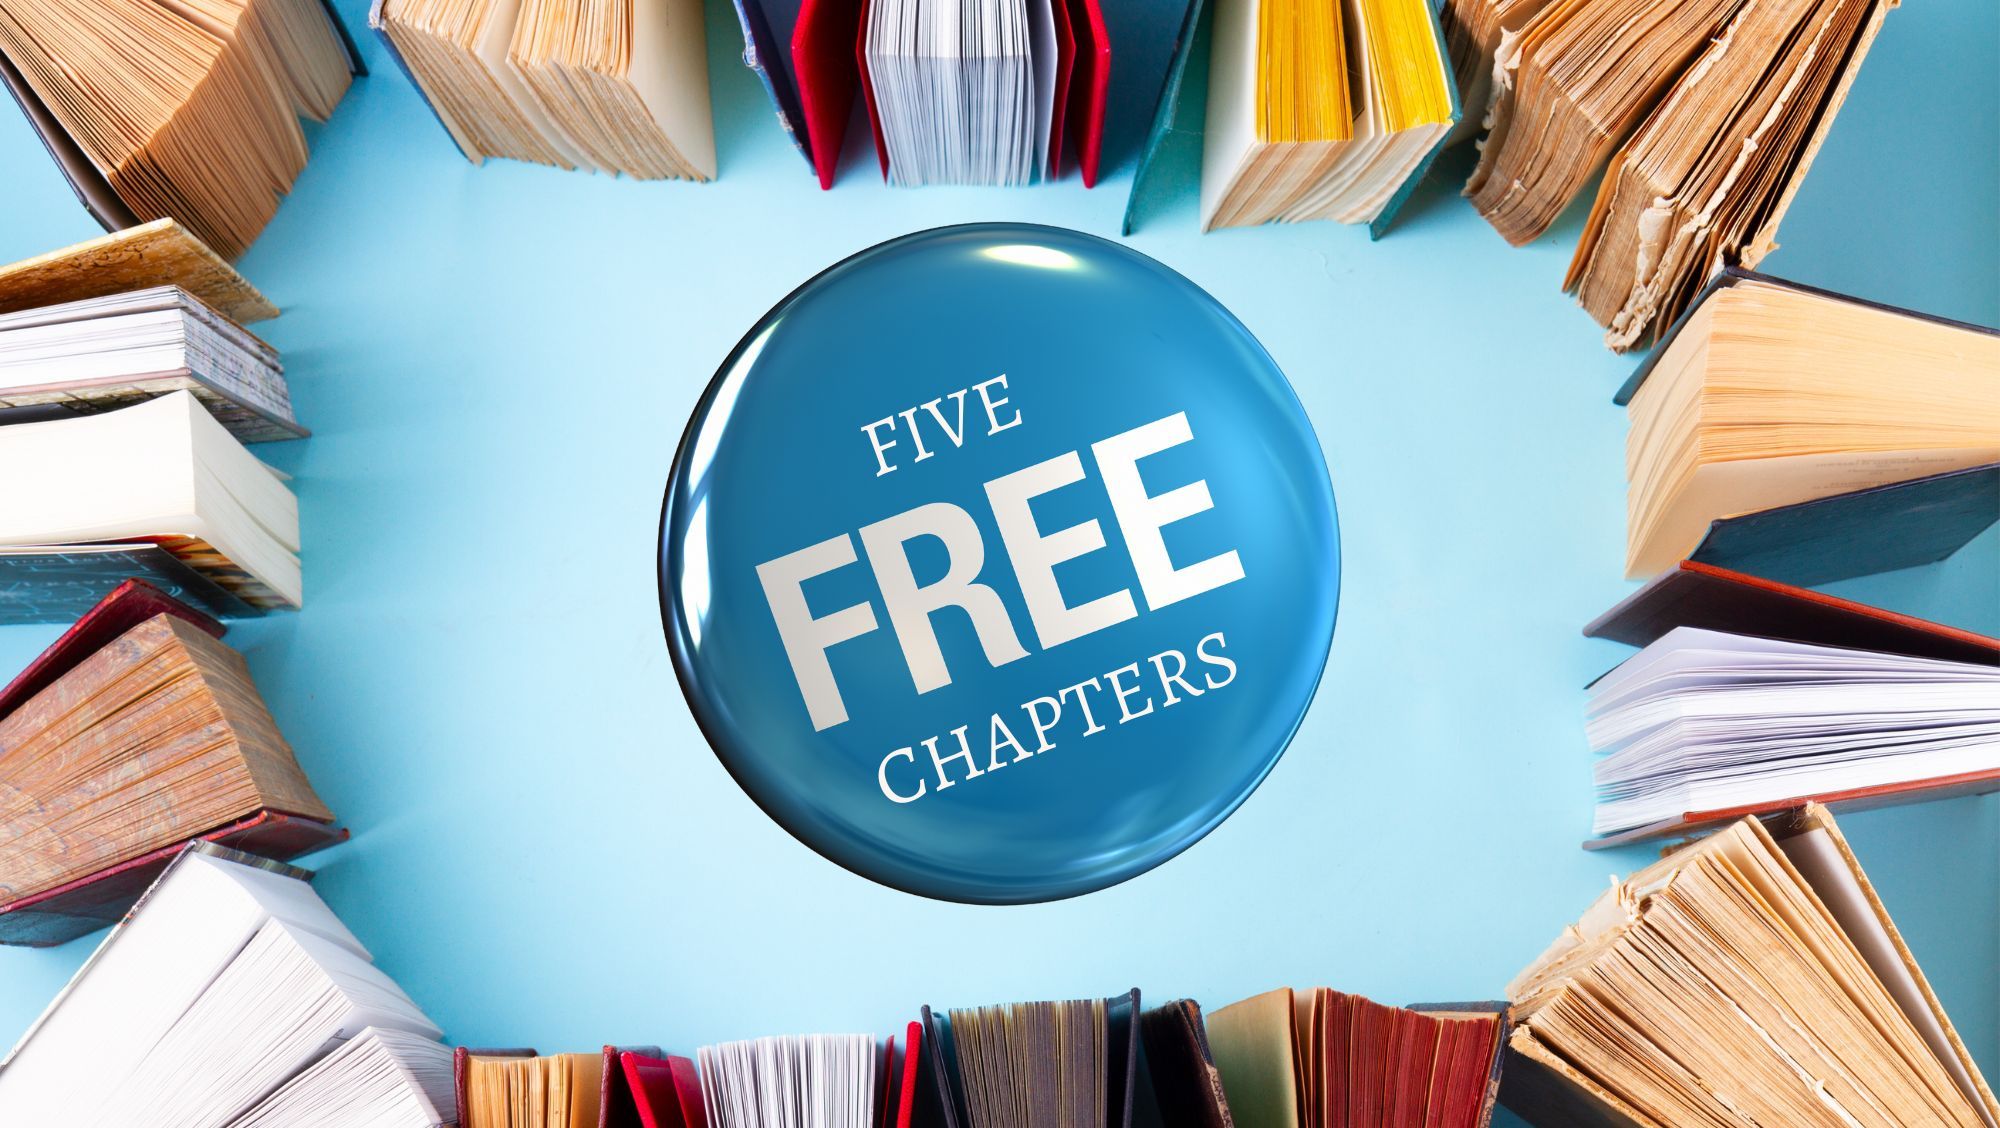 Five Free Chapters